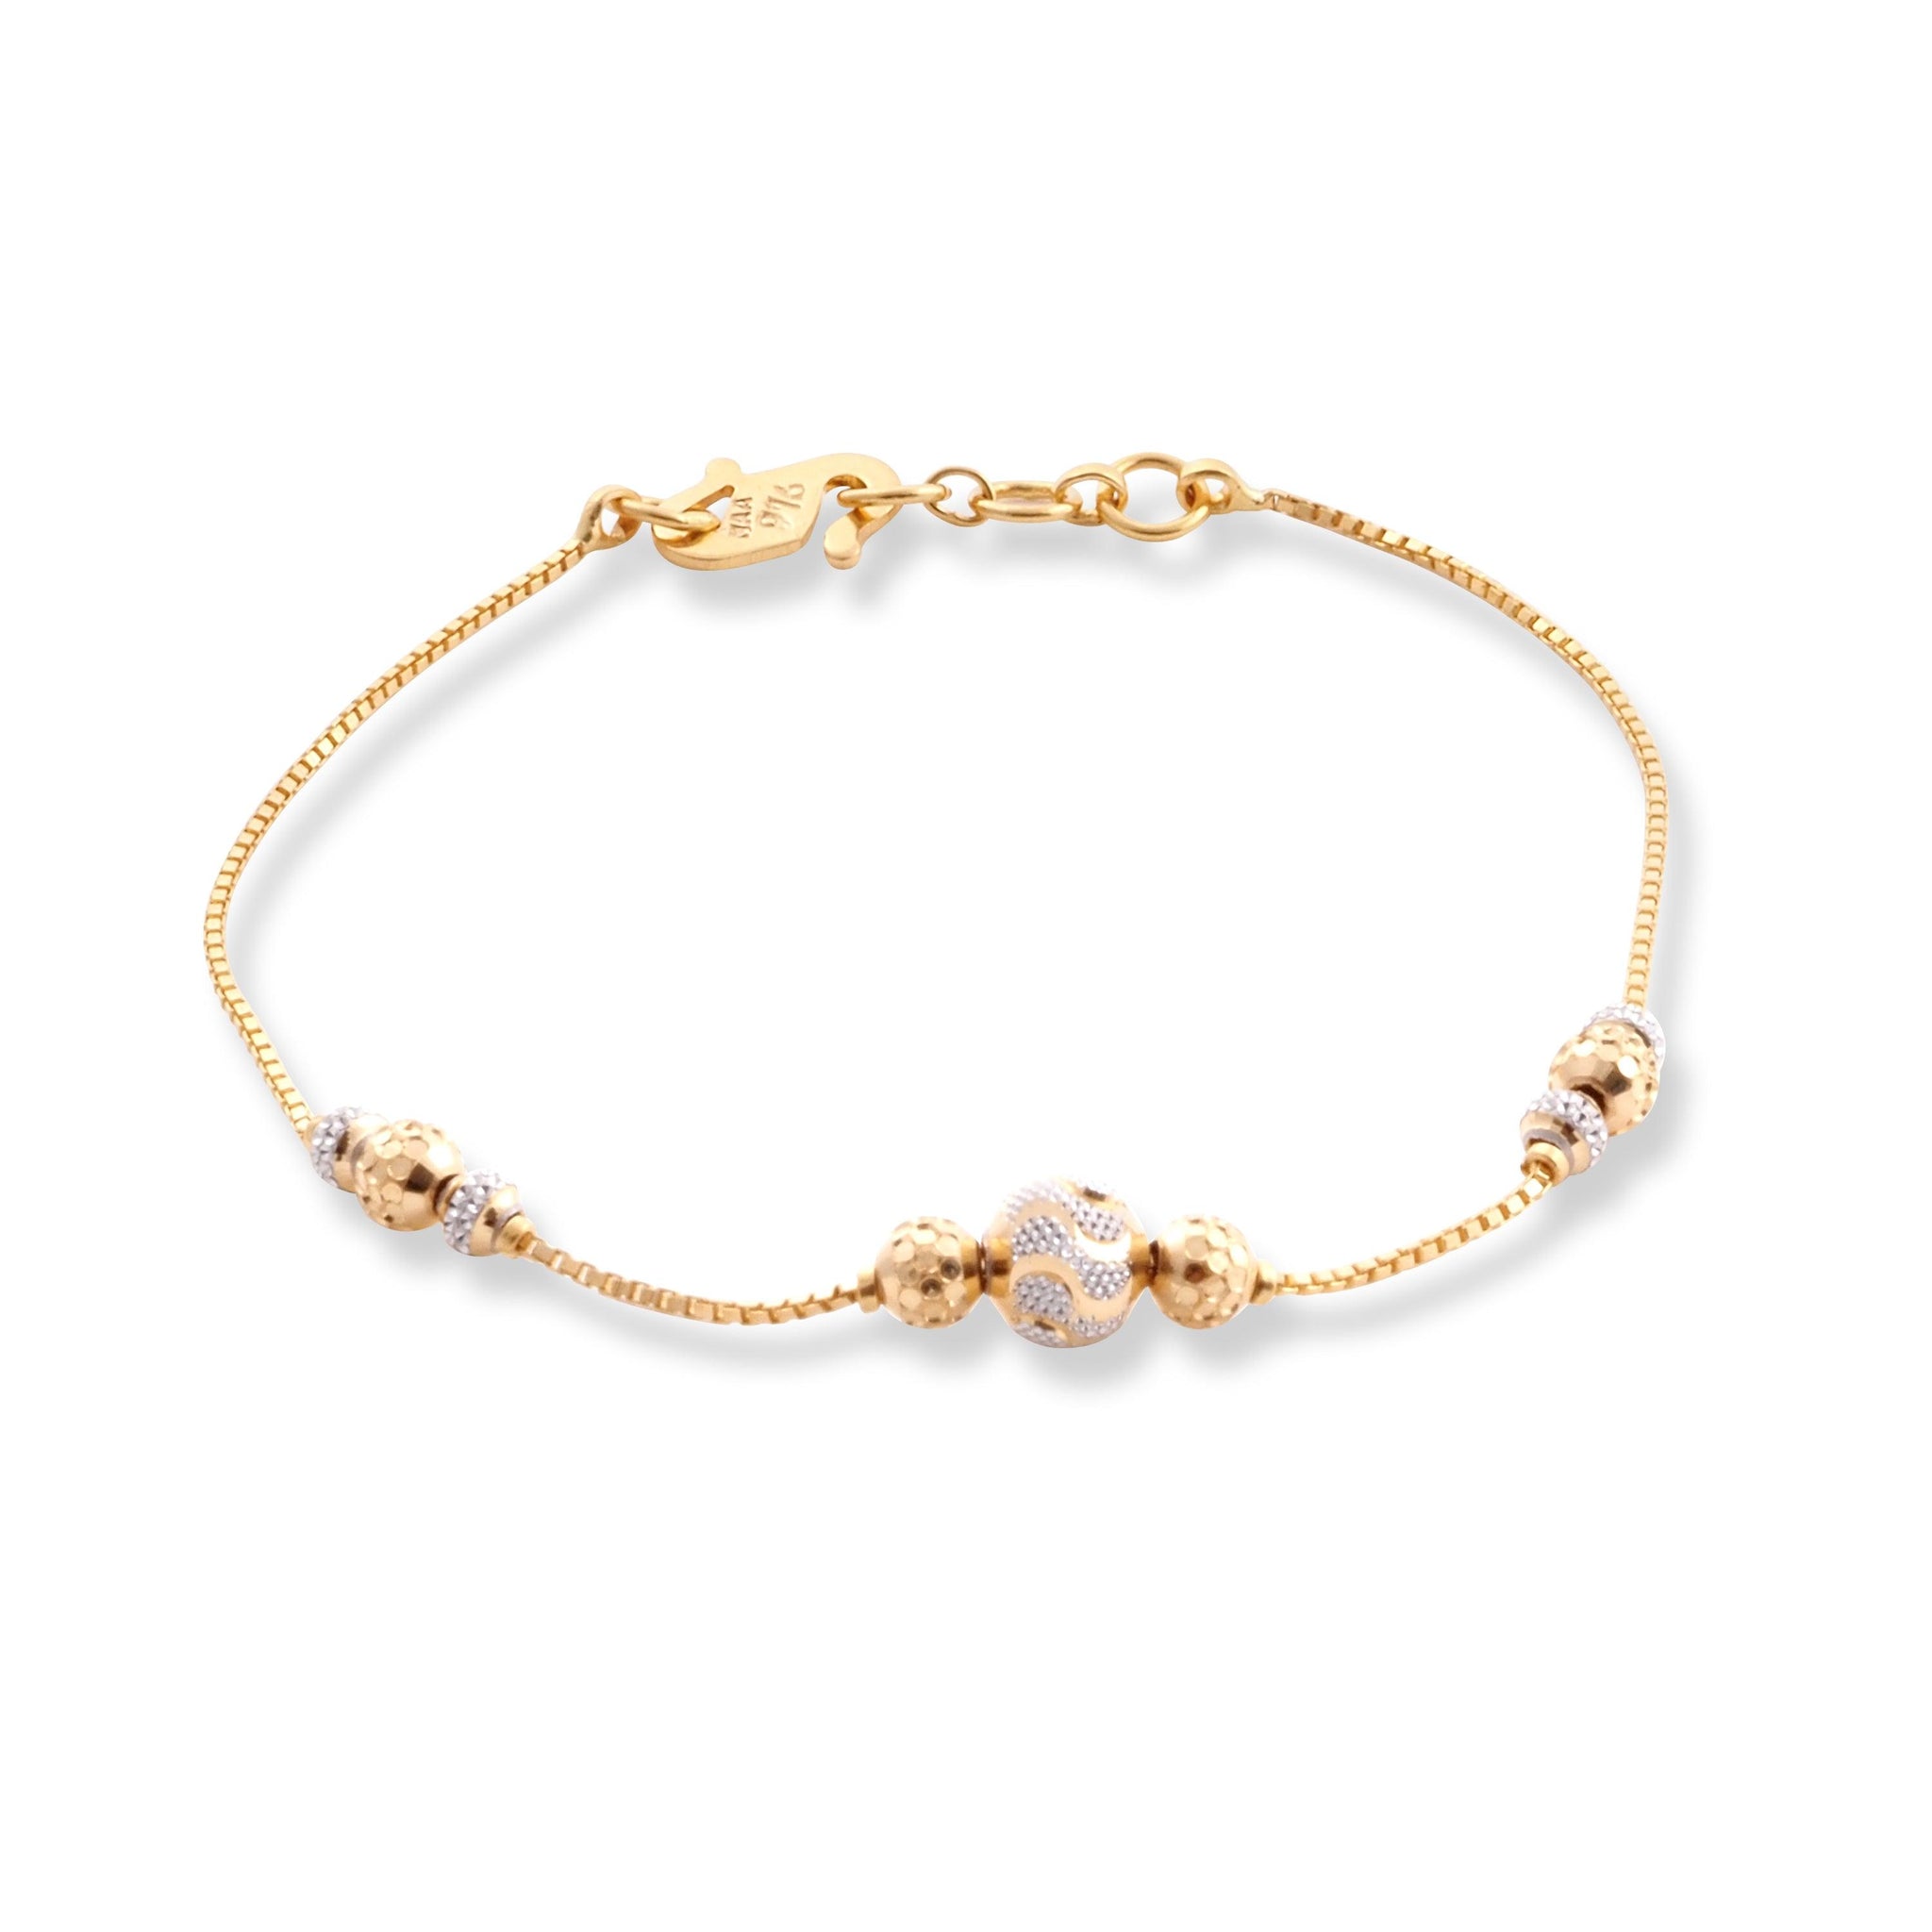 22ct Yellow Gold Bracelet in Rhodium Plating Beads with ''S'' Clasp LBR-8504